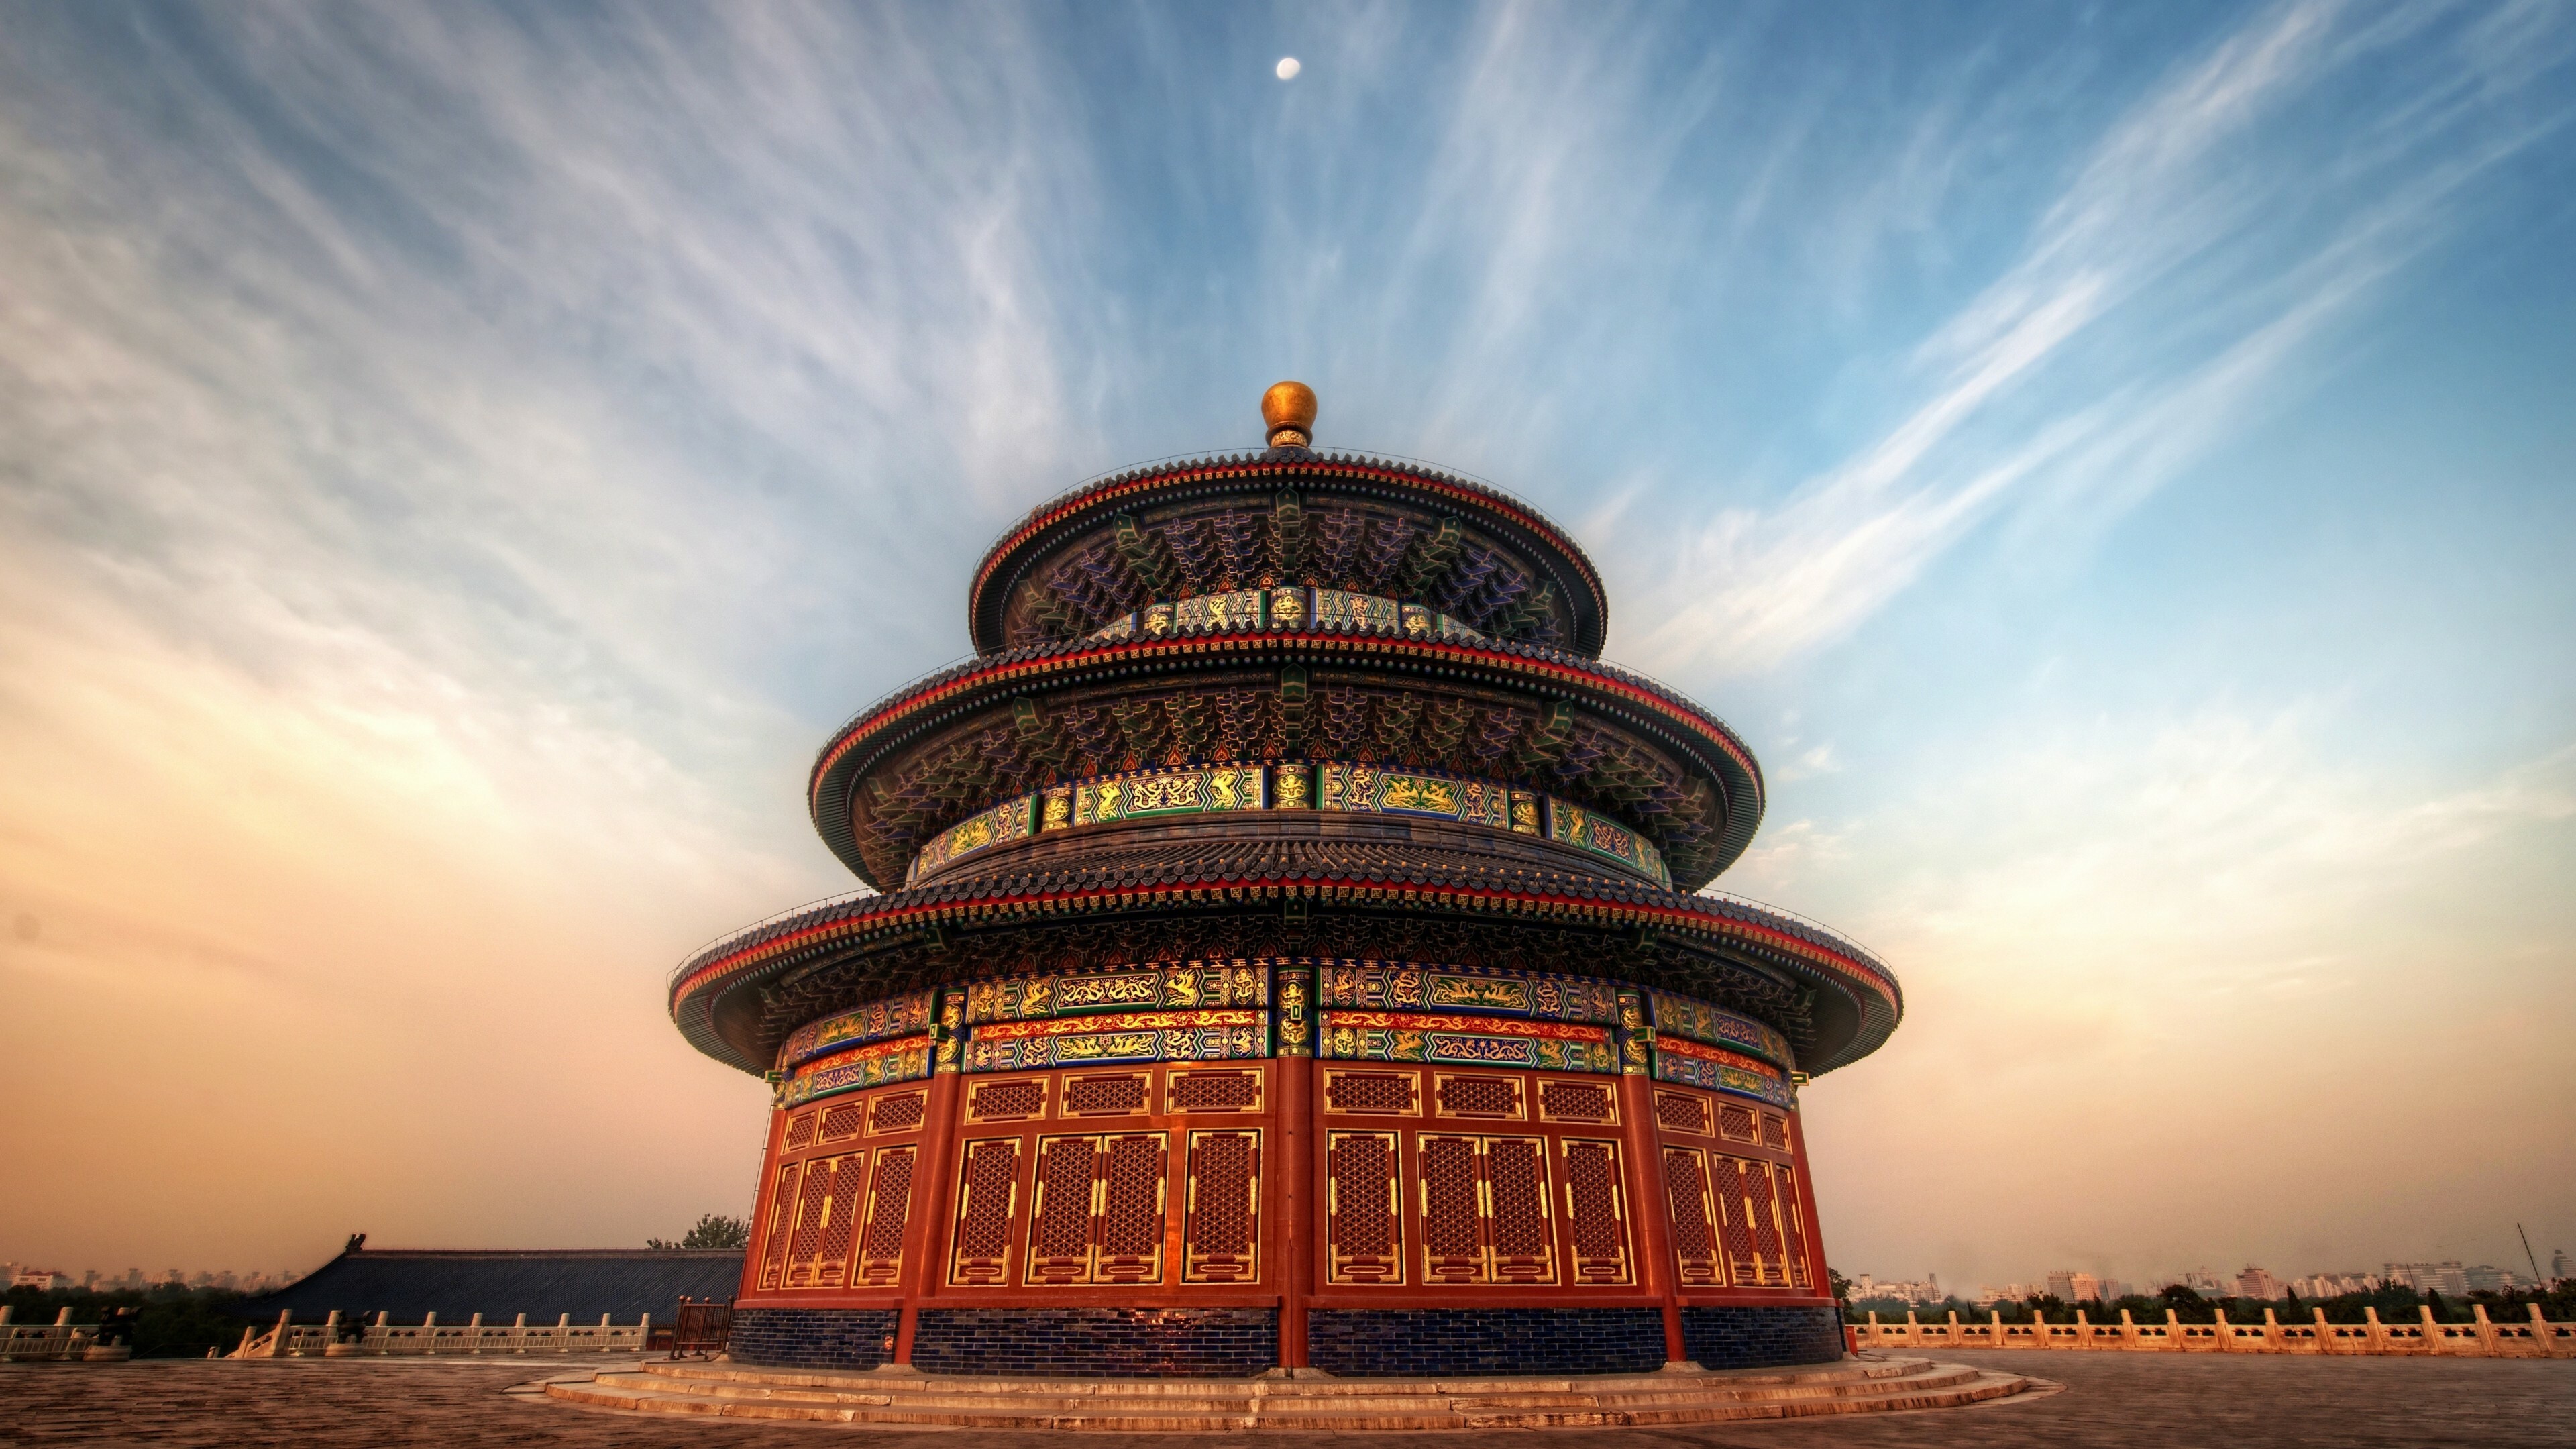 China: The Temple of Heaven, The largest of Beijing's imperial of religious building complexes. 3840x2160 4K Wallpaper.